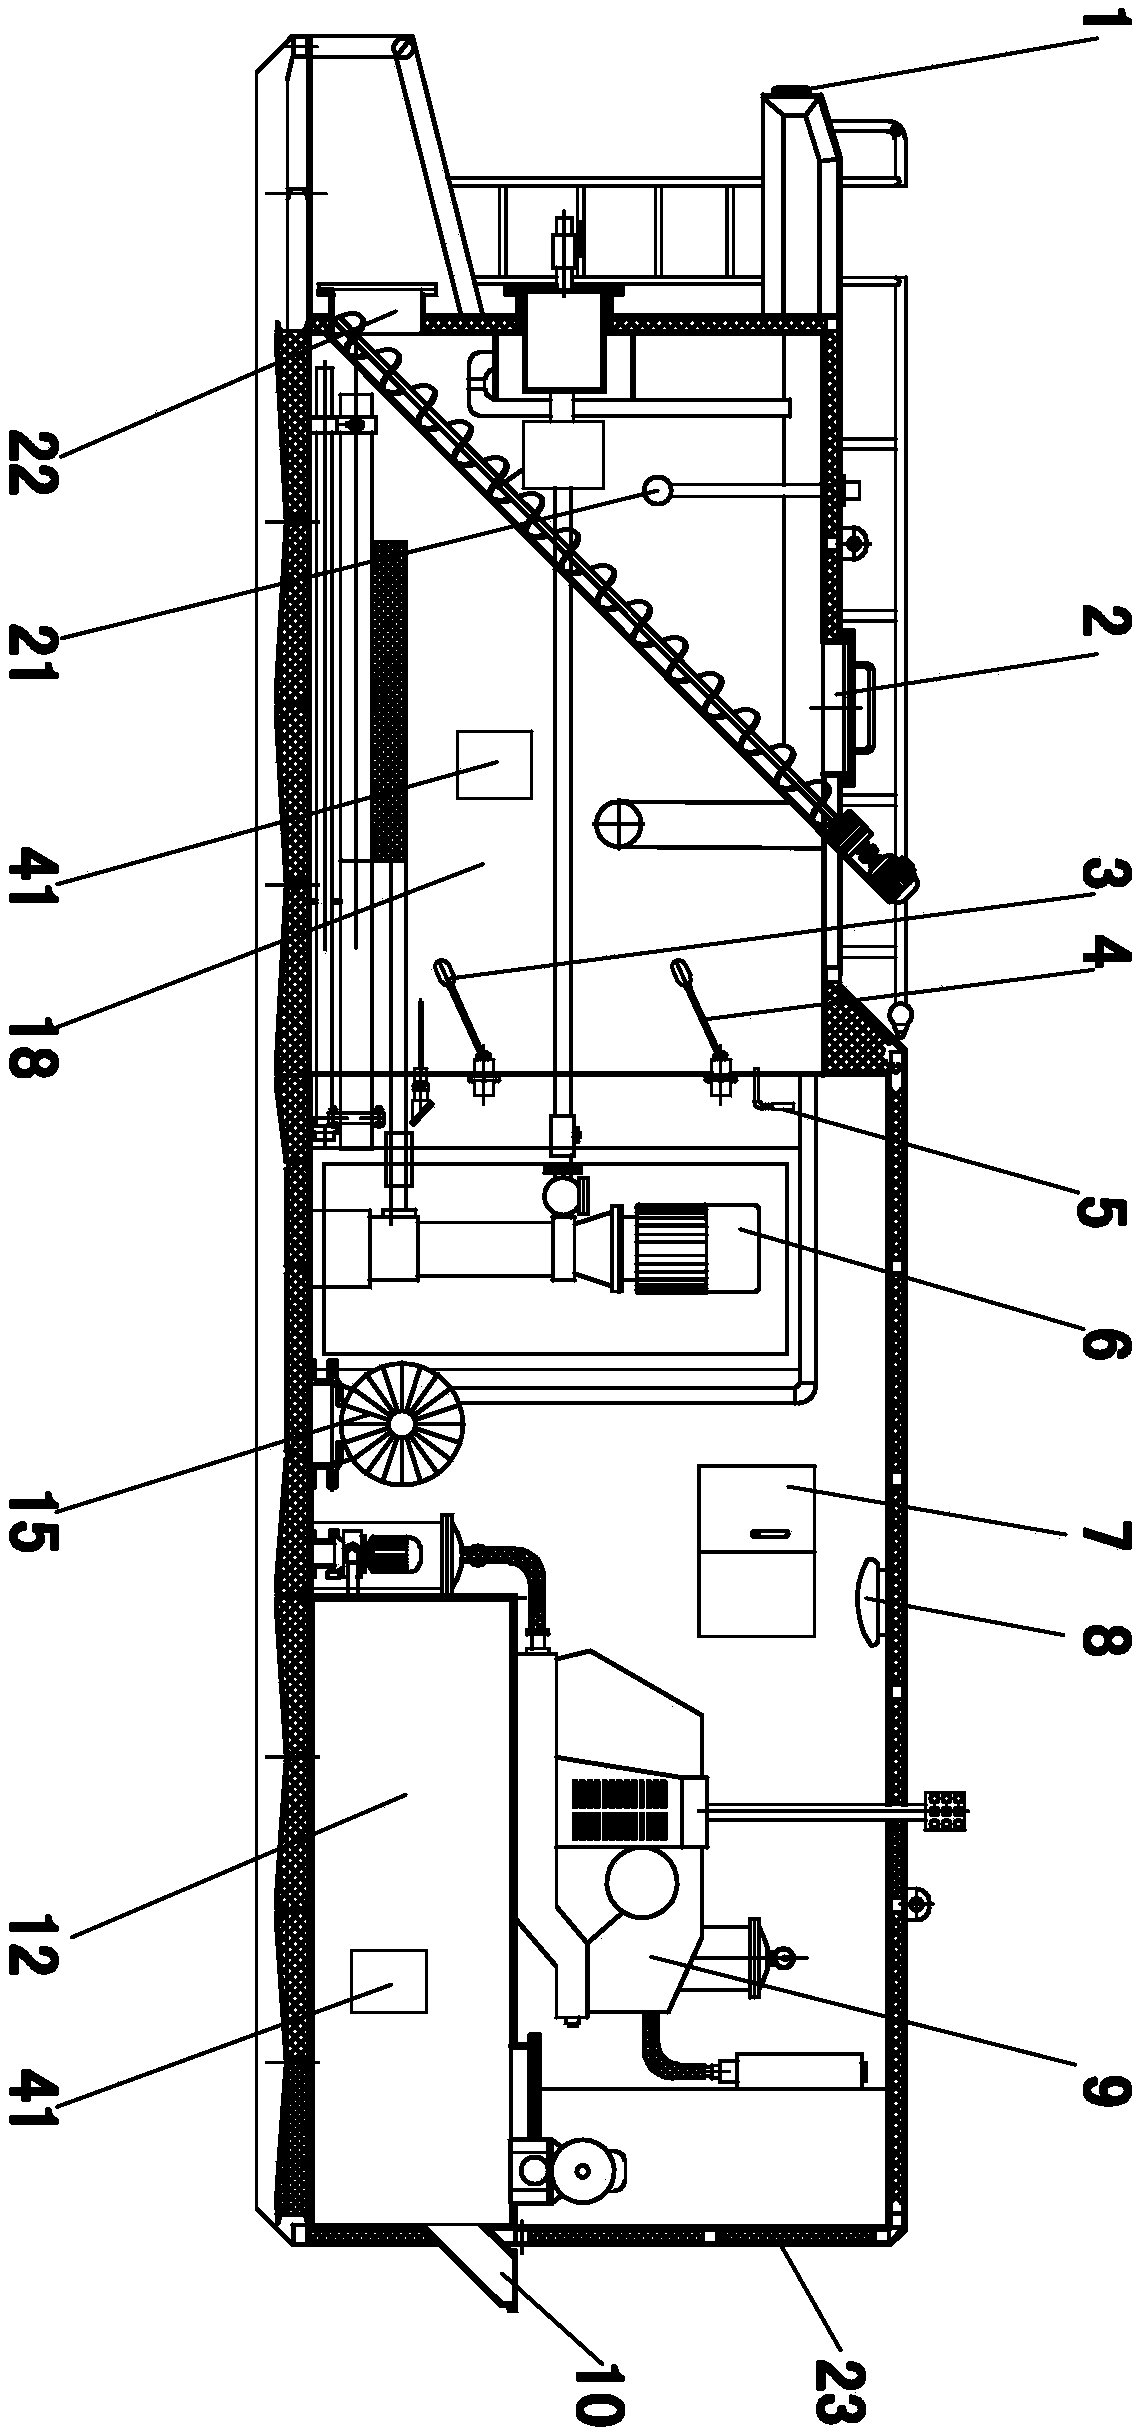 Integral apparatus for cleaning work